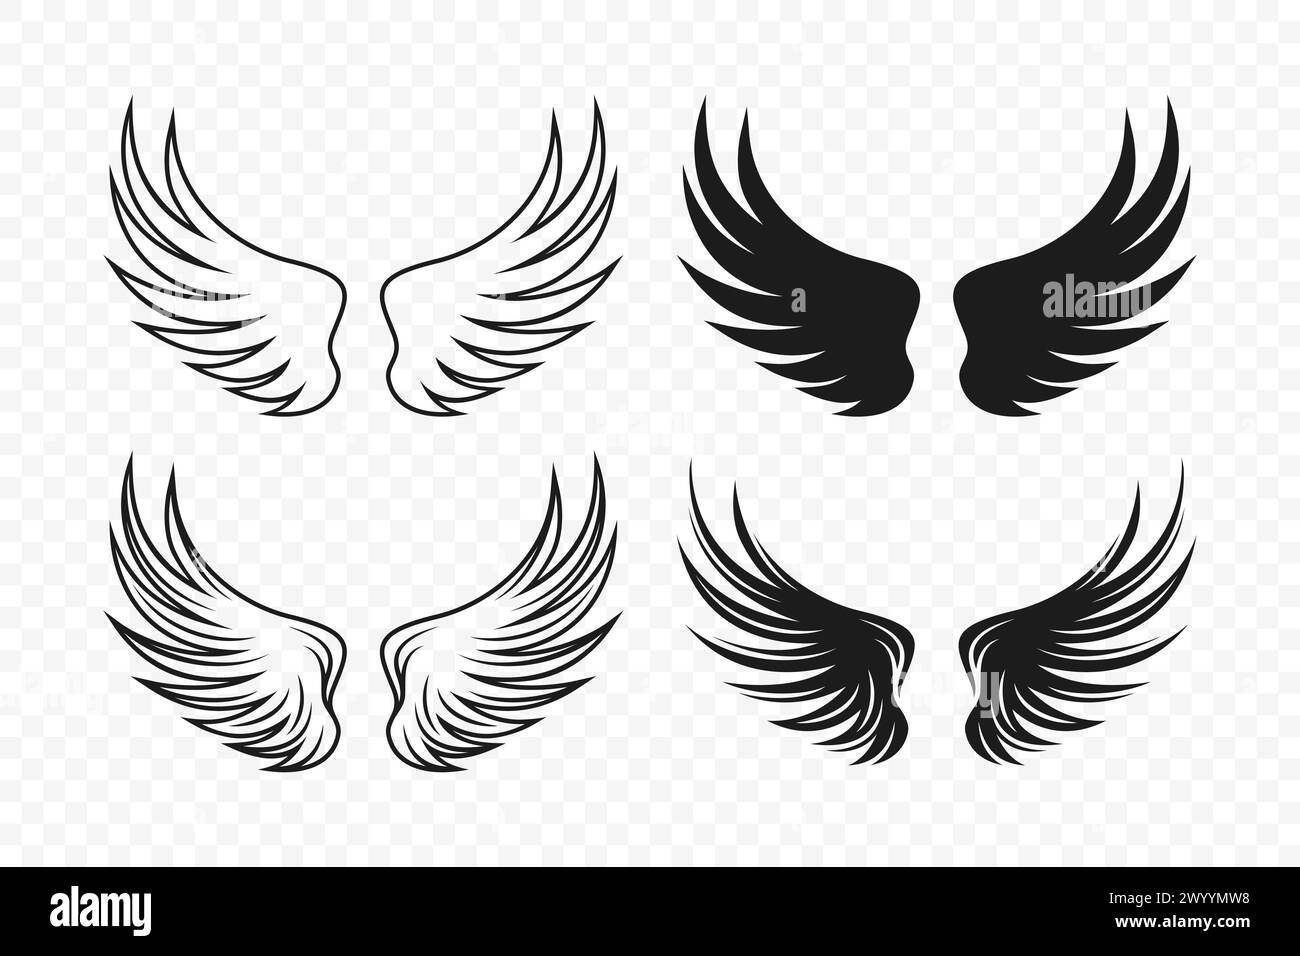 Vector Wings. Black Monochrome Angel Wings Silhouette. Design Template, Clipart. Cupid, Bird Wings. Vector Illustration Stock Vector